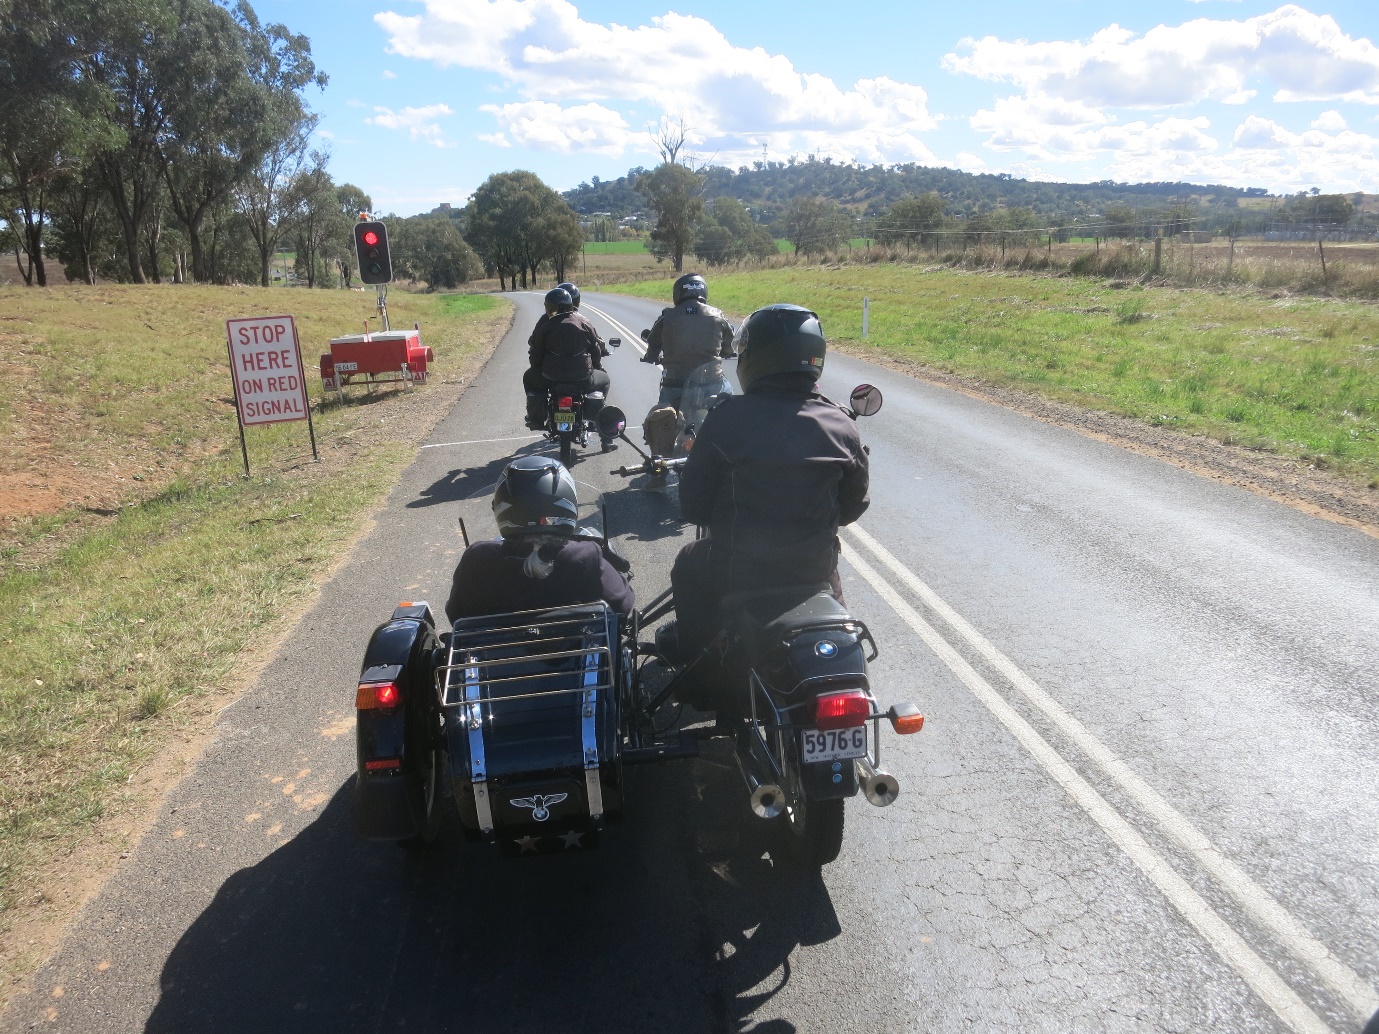 A group of people riding motorcycles on a road

Description automatically generated with medium confidence